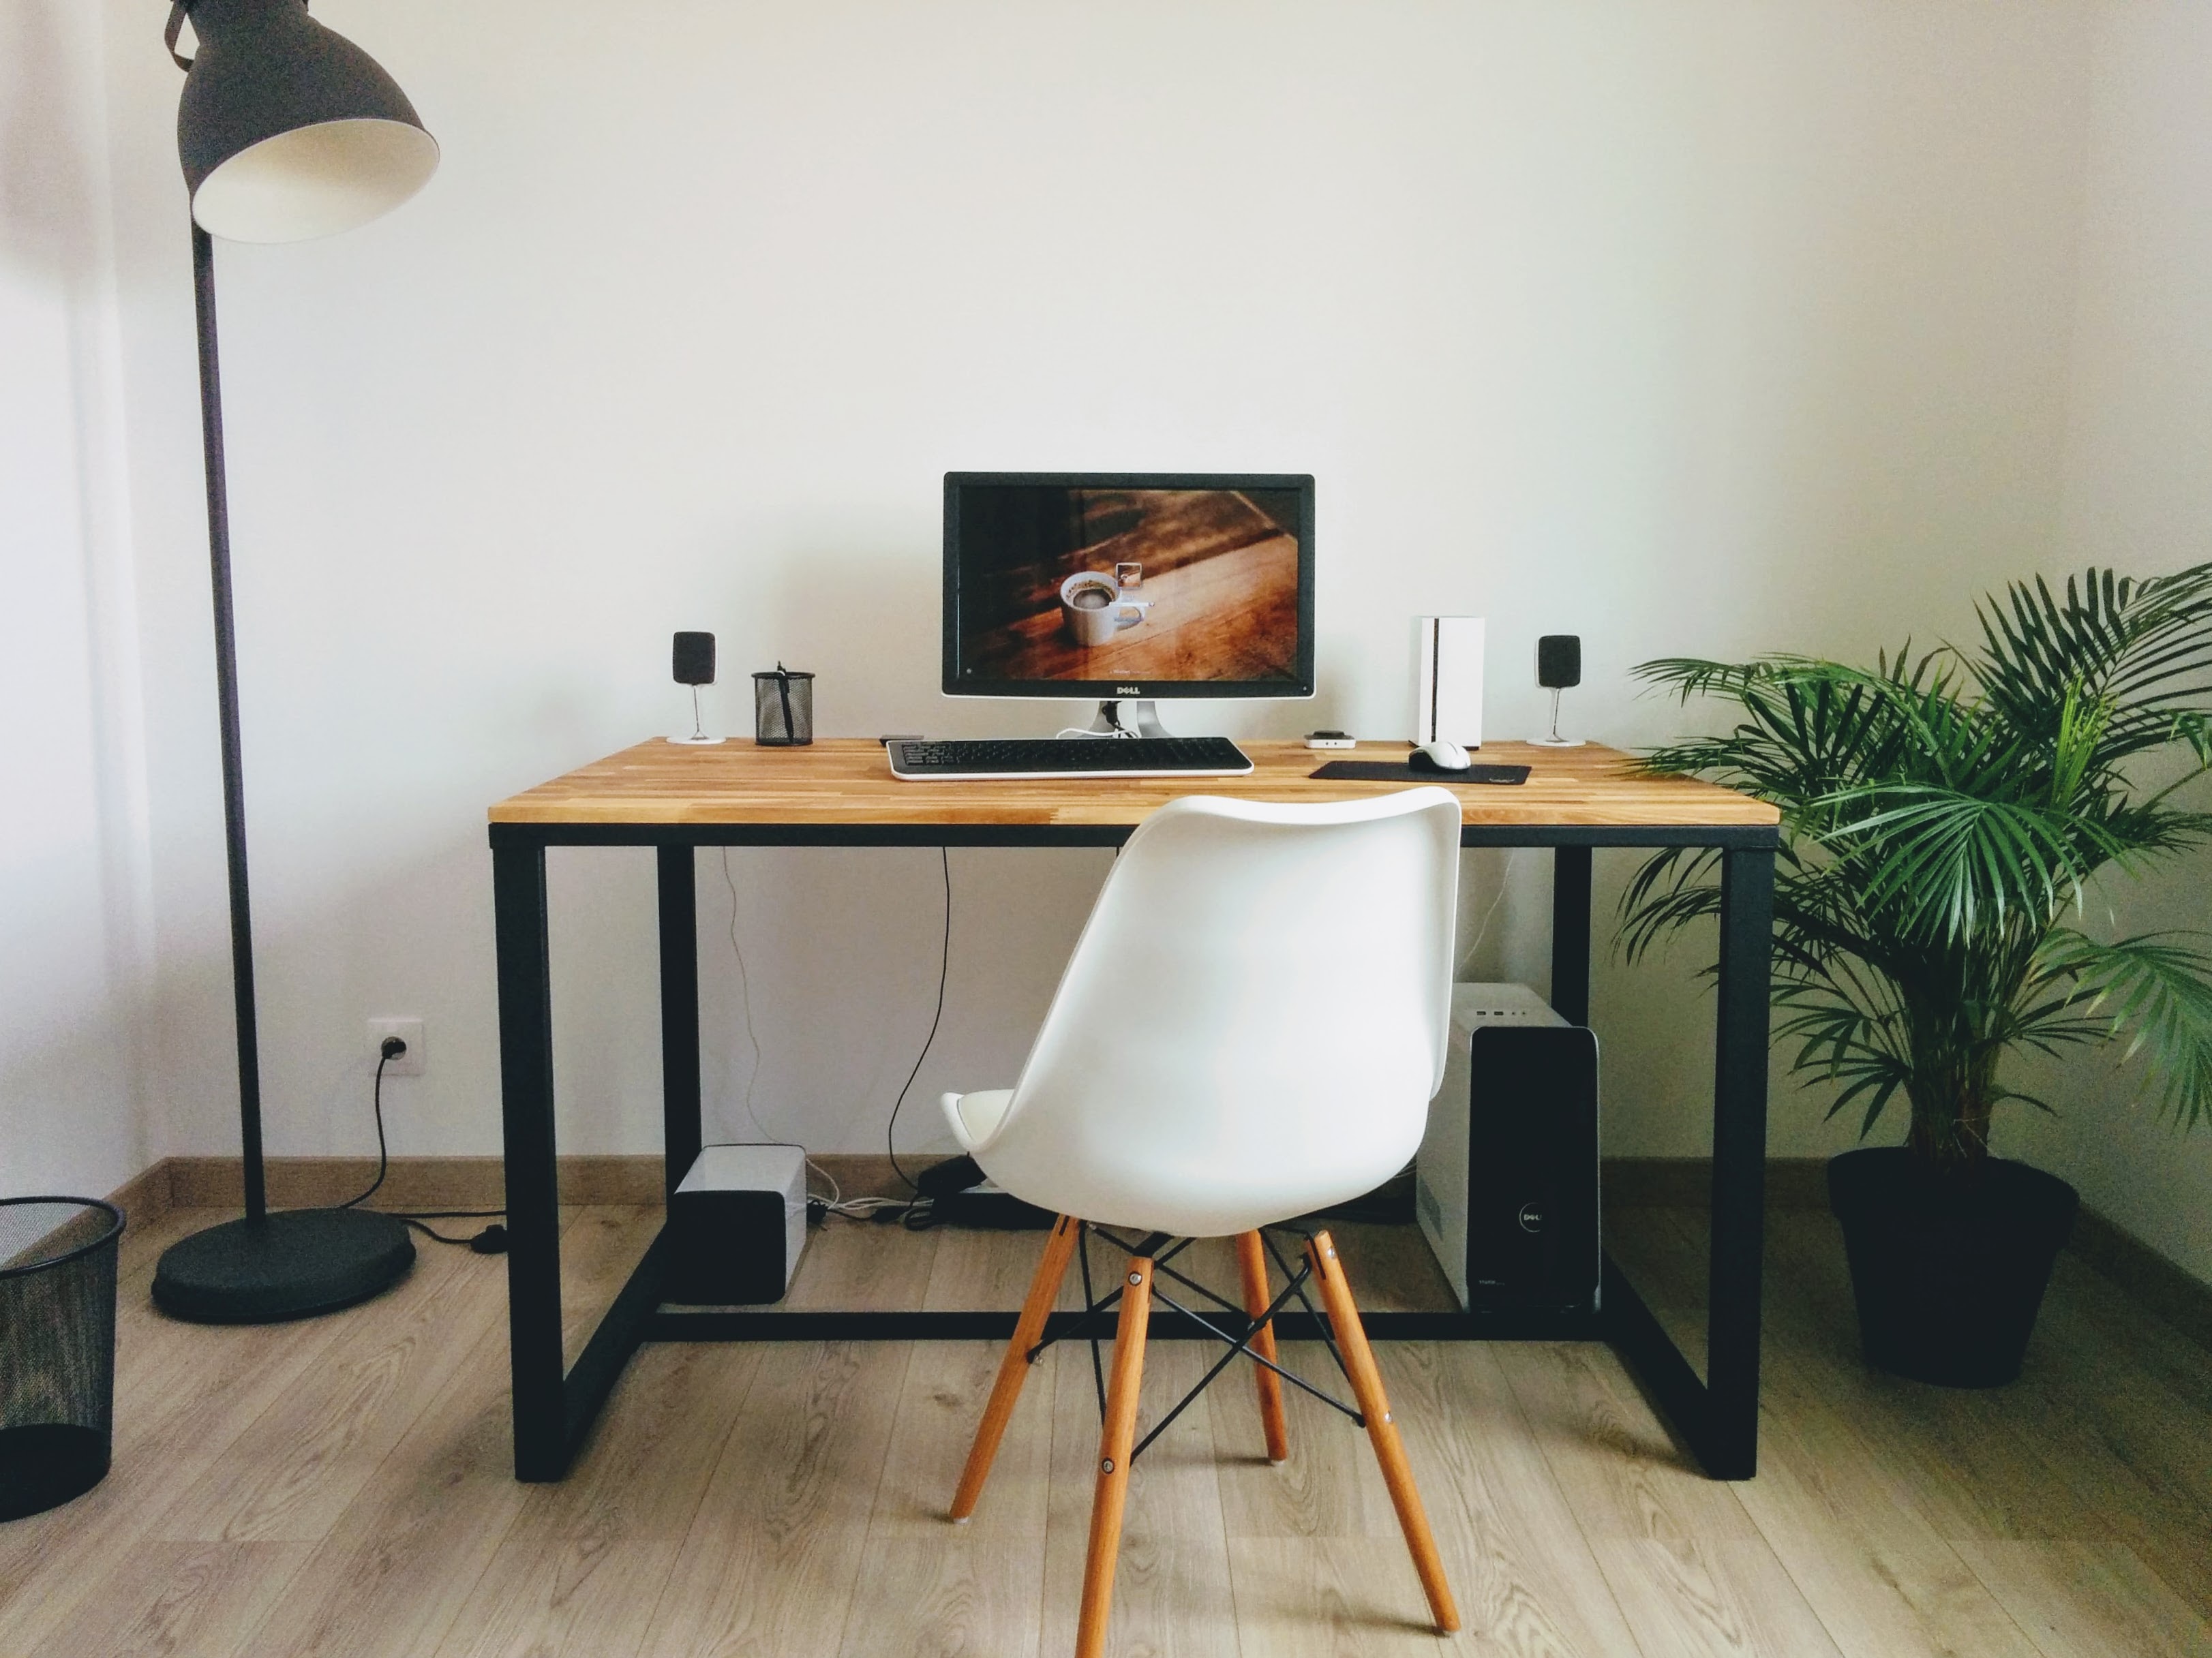 How can you use a home computer desk to decorate your home uniquely?